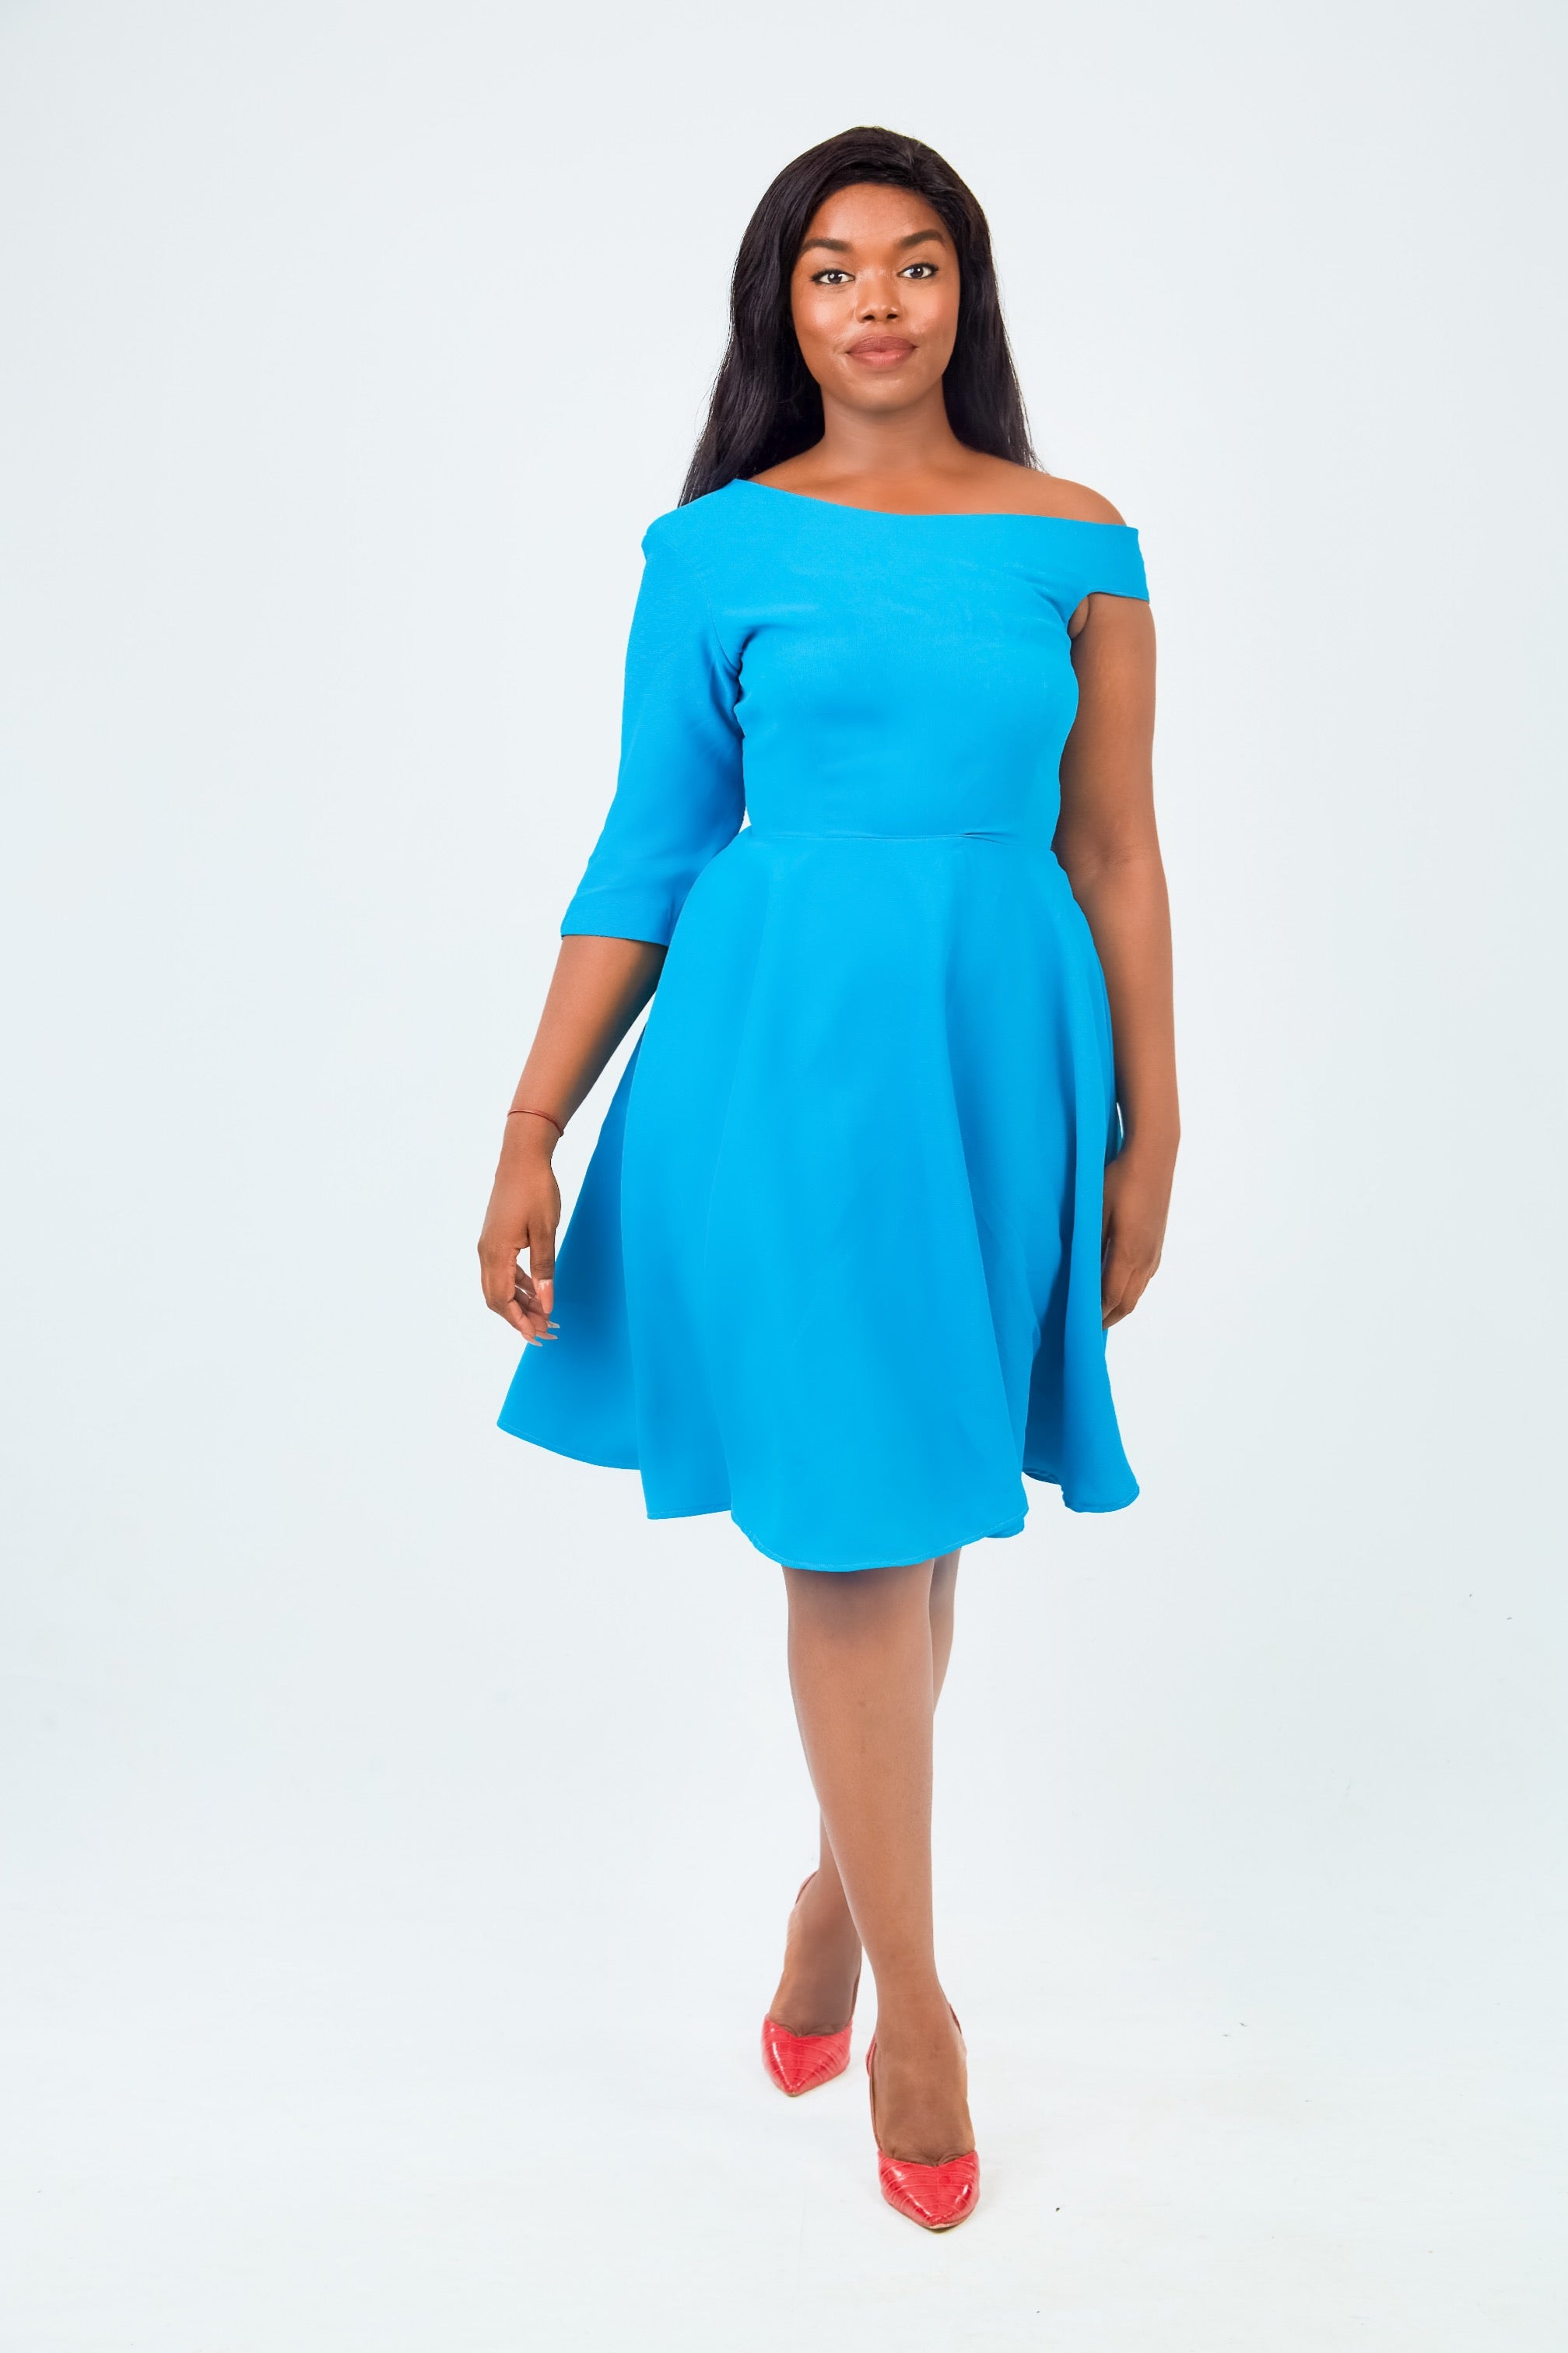 Flair work dress with mismatched sleeves